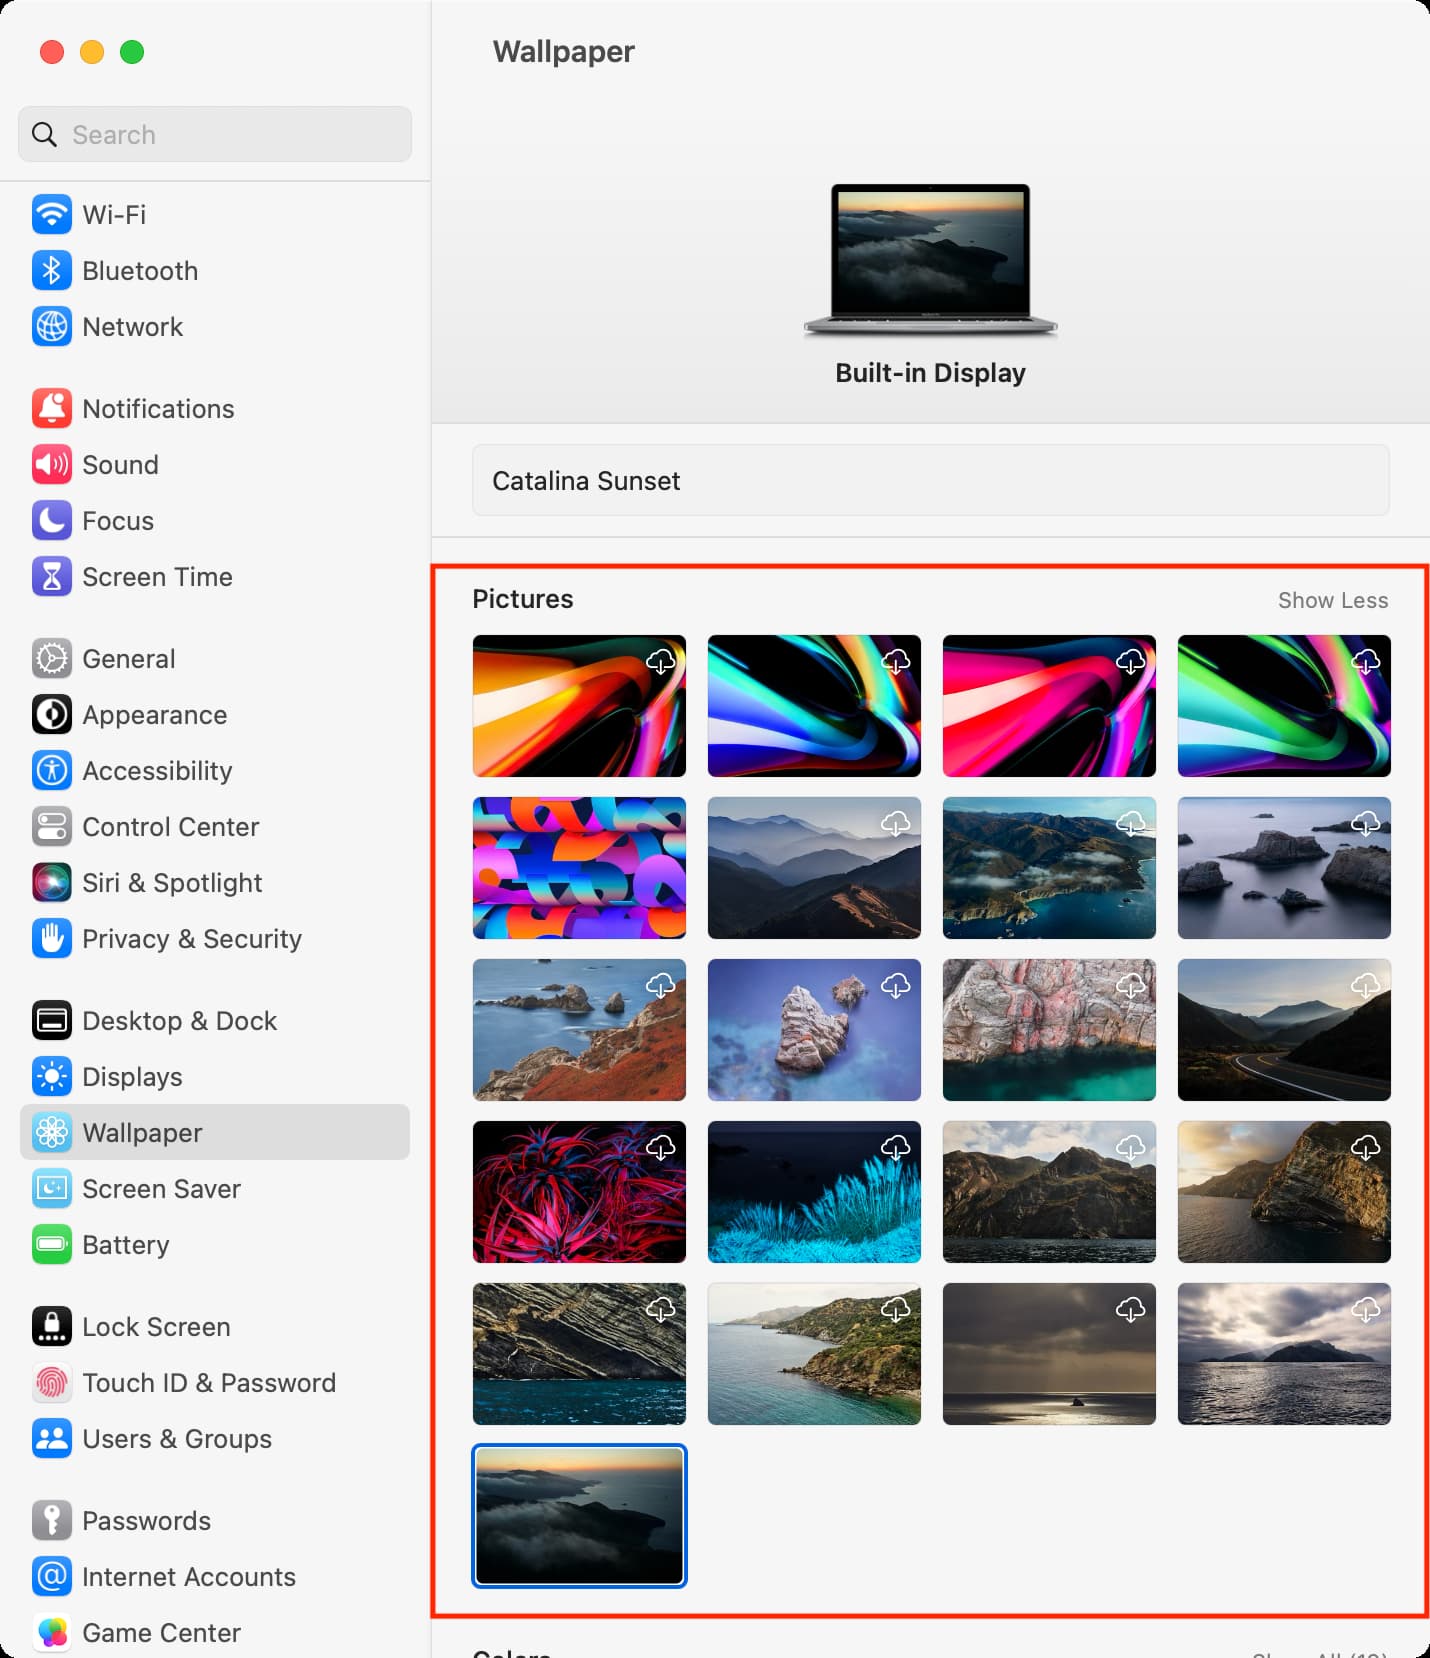 Stock Apple Pictures wallpapers on Mac